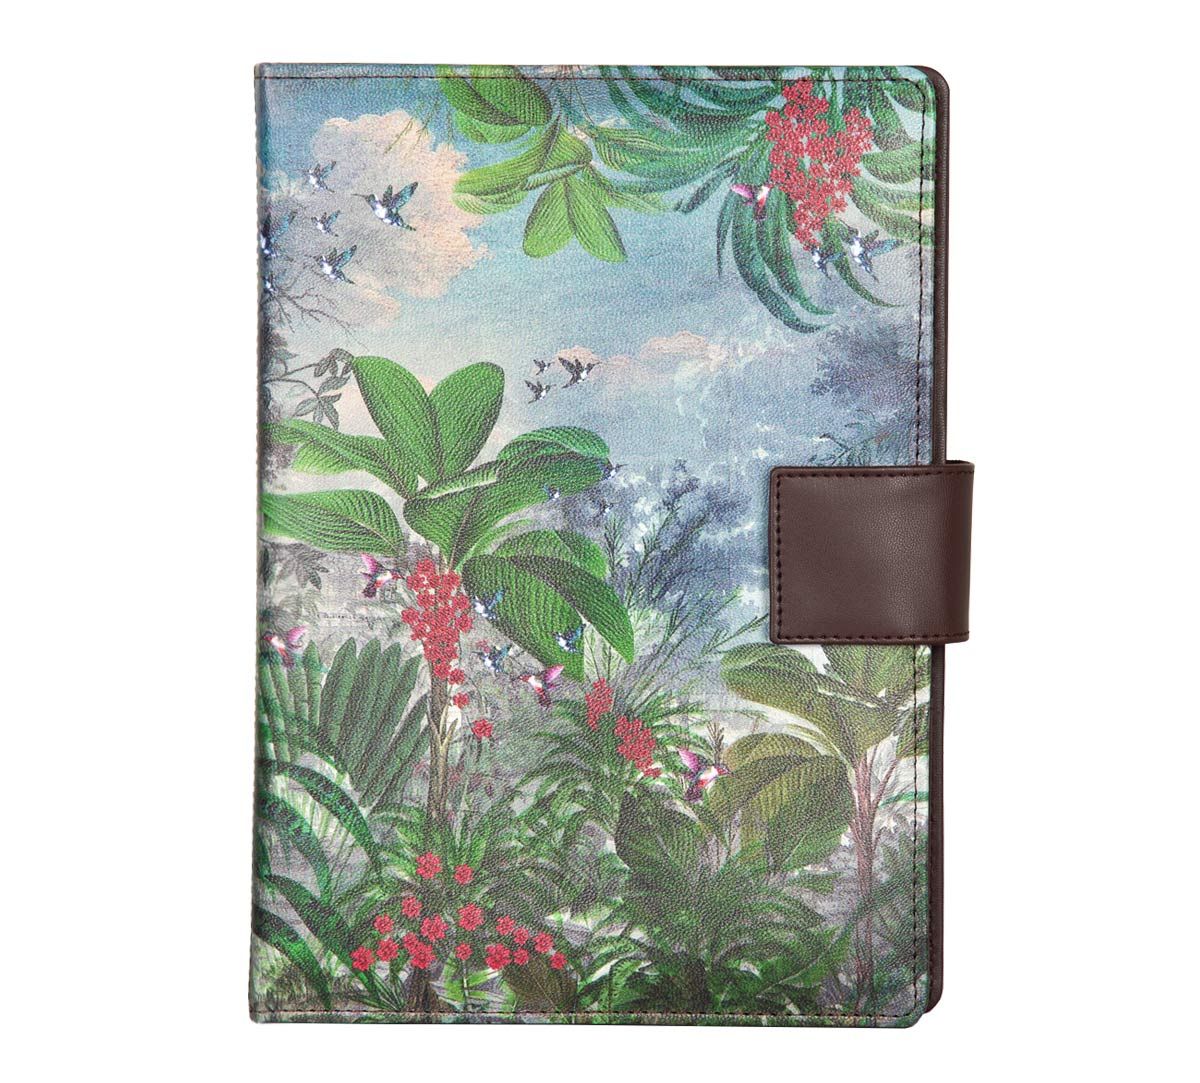 India Circus Tropical View Notebook Planner